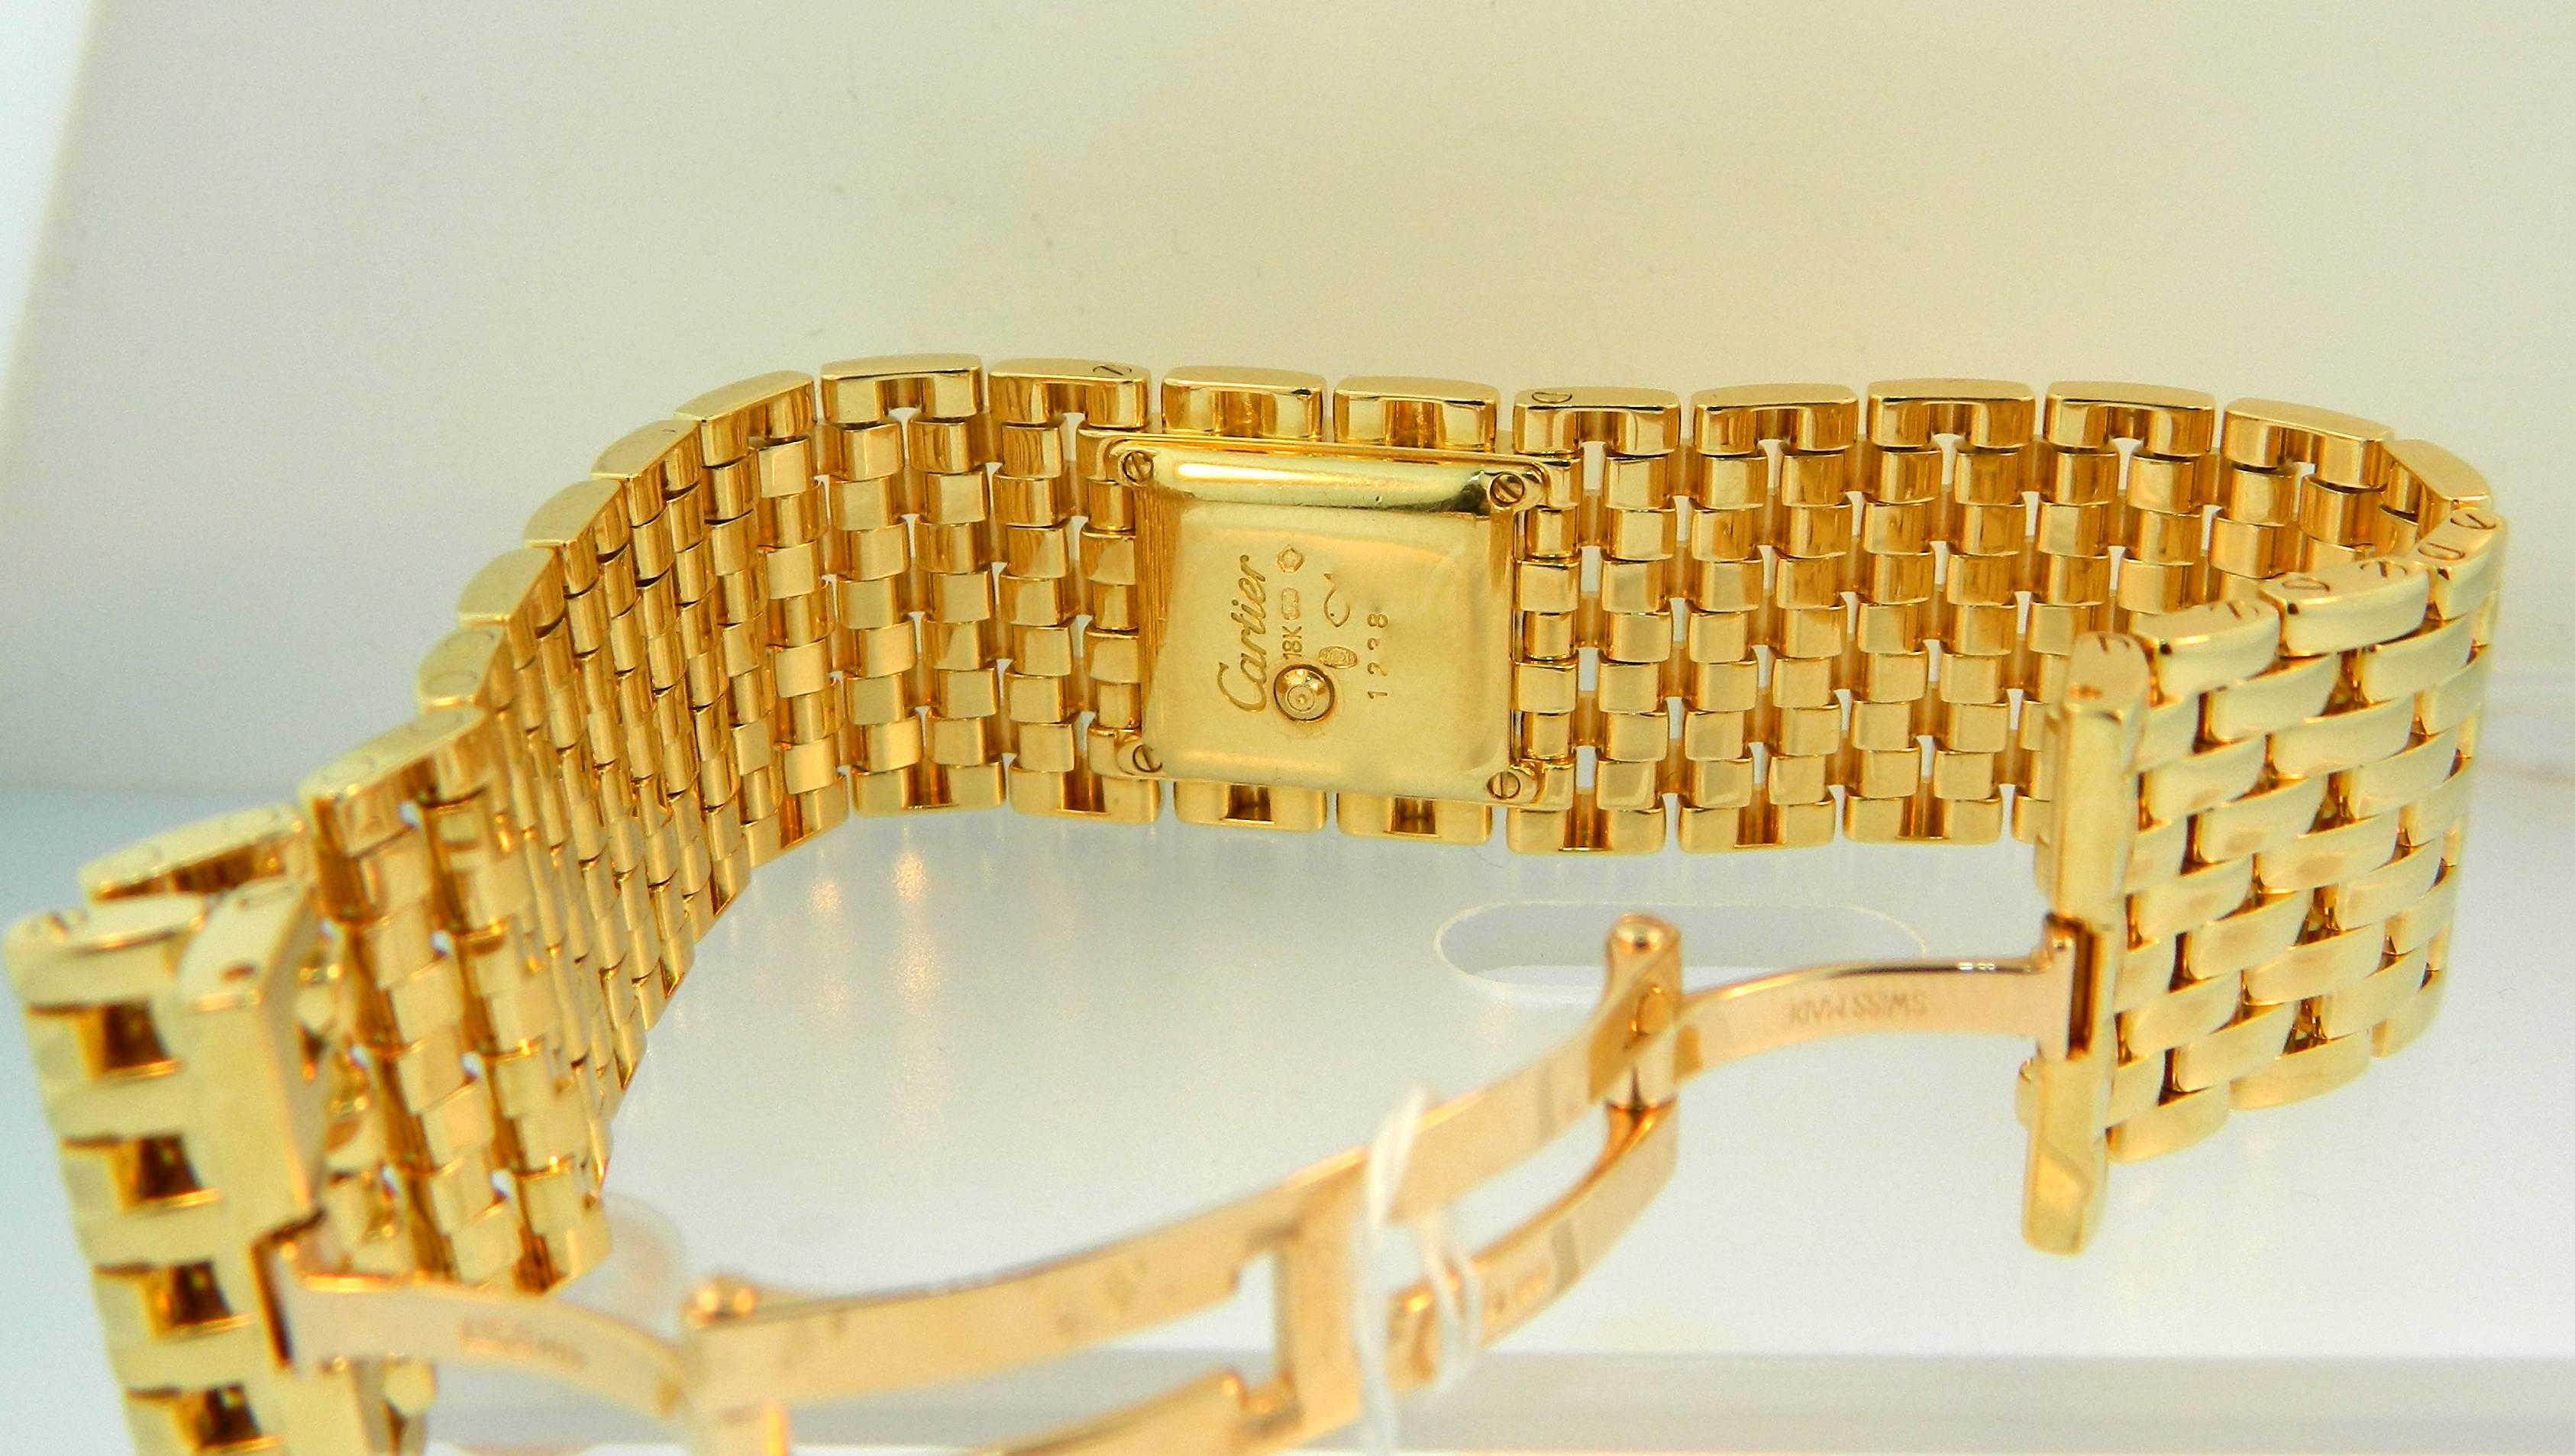 A ladies 18kt yellow gold Cartier Panthere Ruban ladies wrist watch.  Quartz Cartier movement. 
Reference  WG3007T7.  Accompanied by it's original Cartier Box.